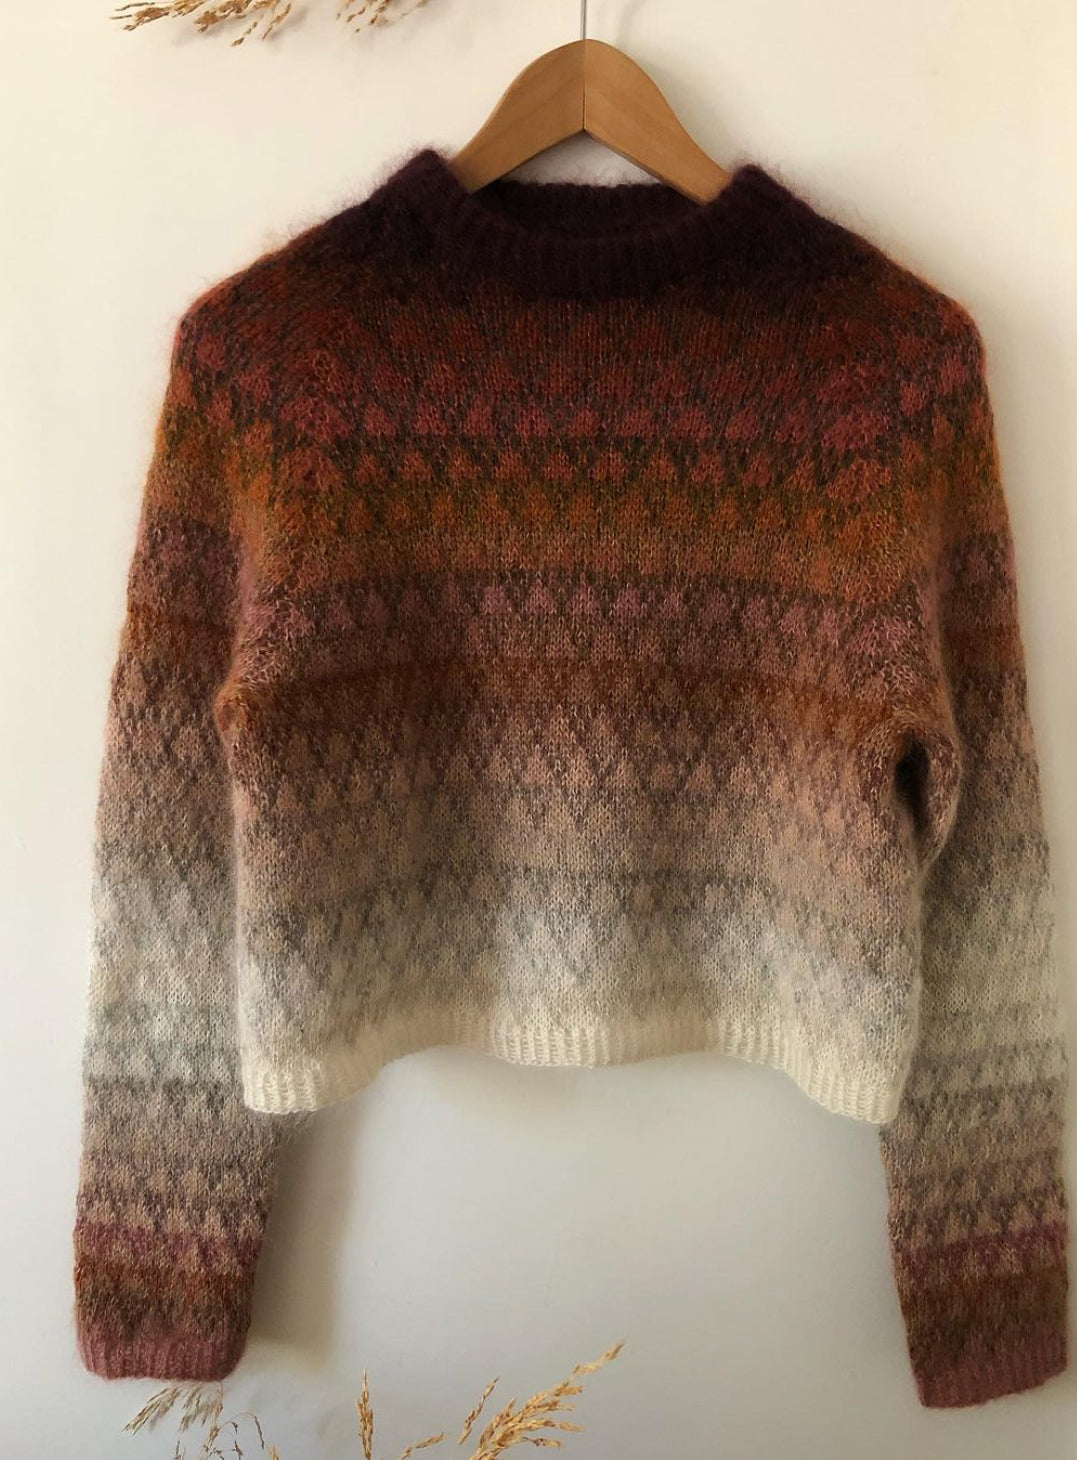 hand knit spot sweater in brown gradient